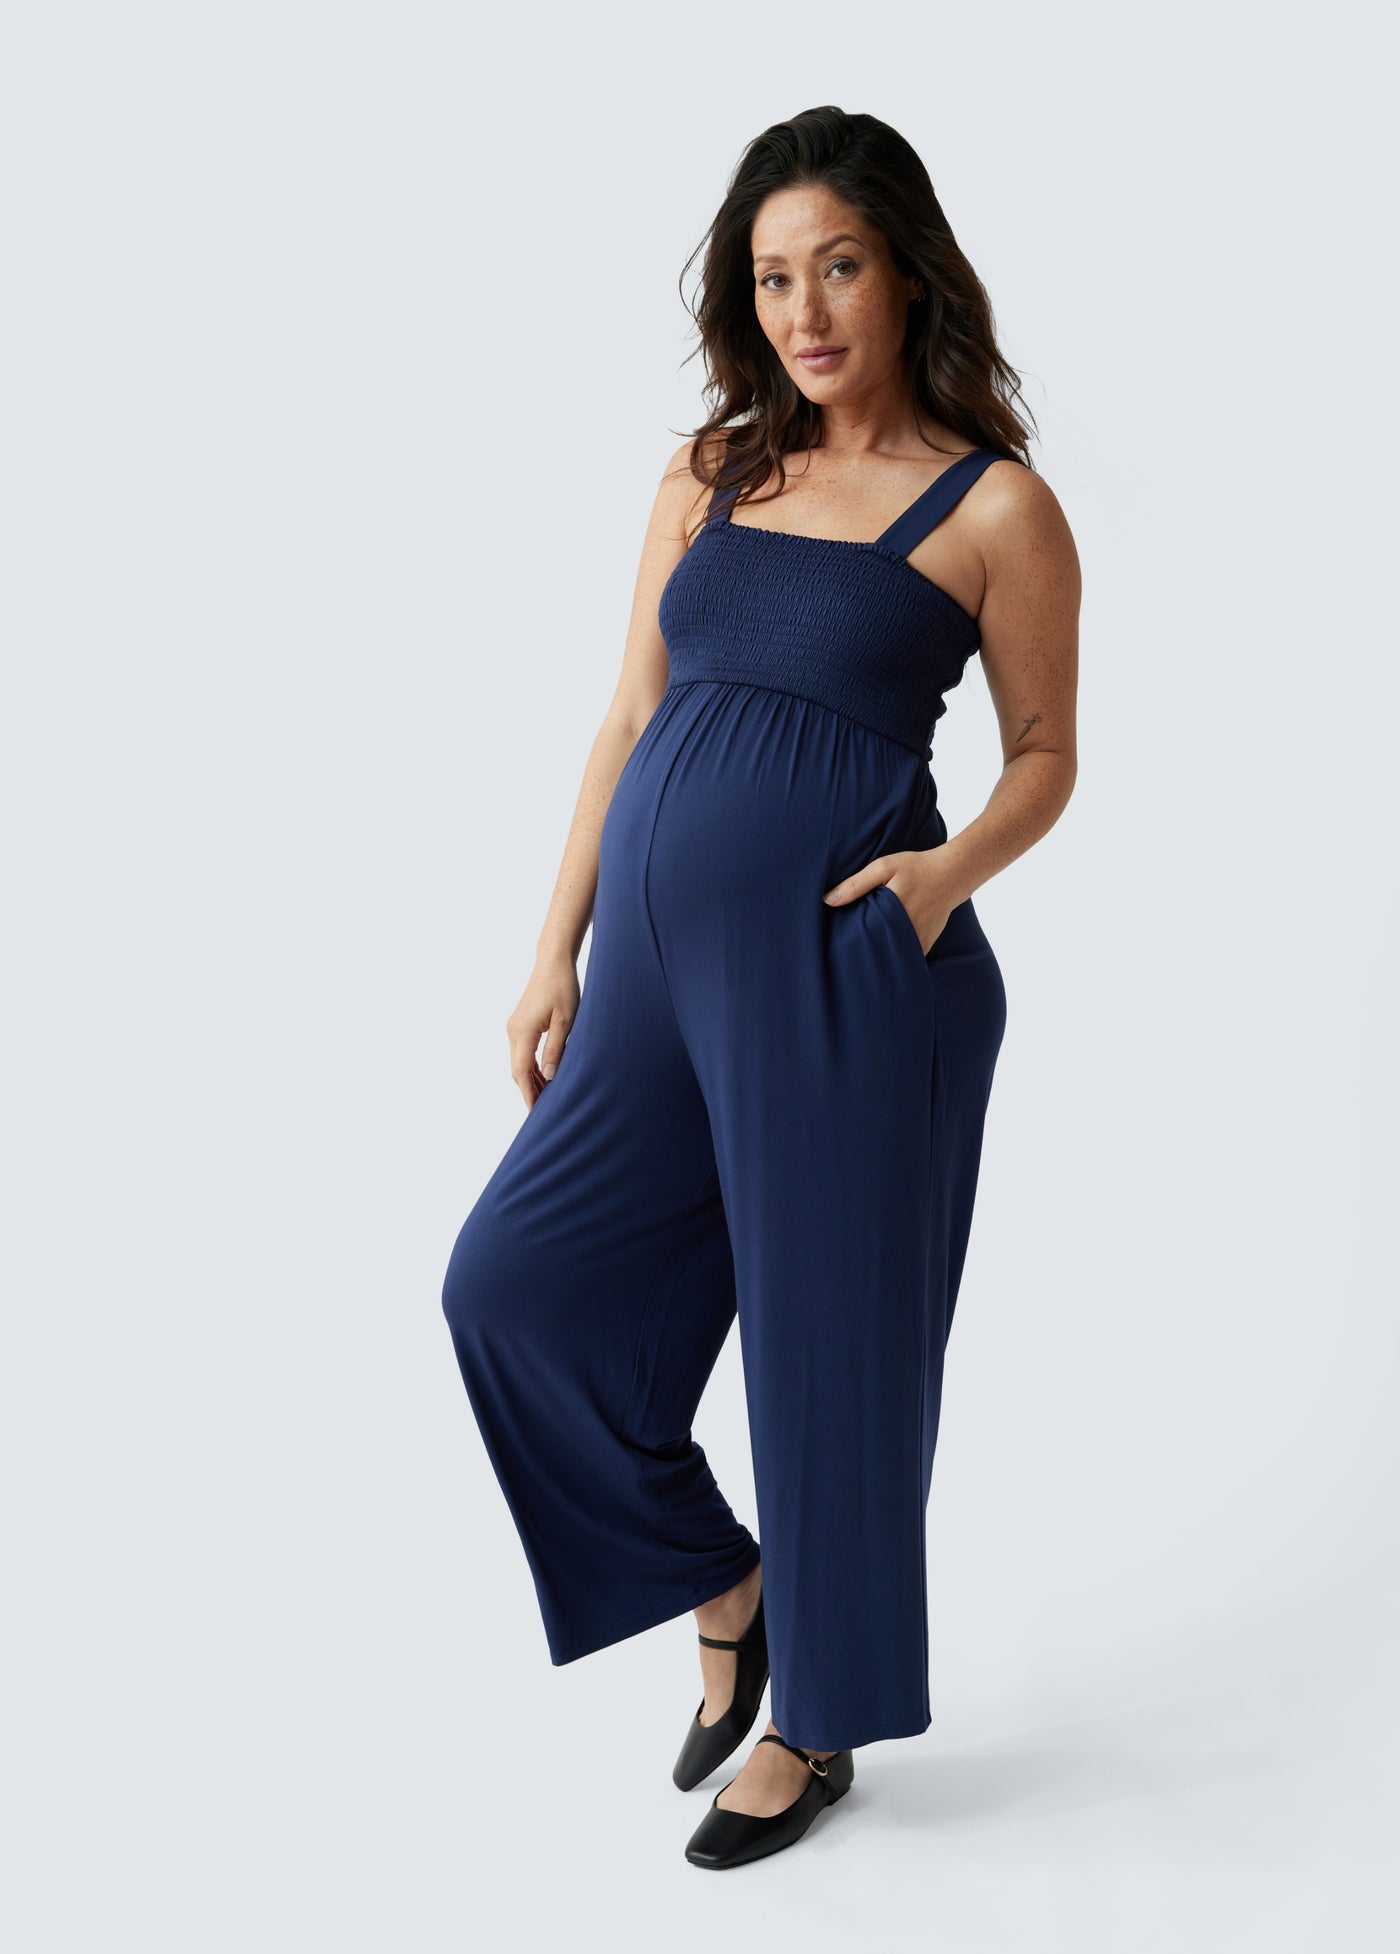 Blue Short Sleeve Maternity Jumpsuit by MONROW for $25 | Rent the Runway